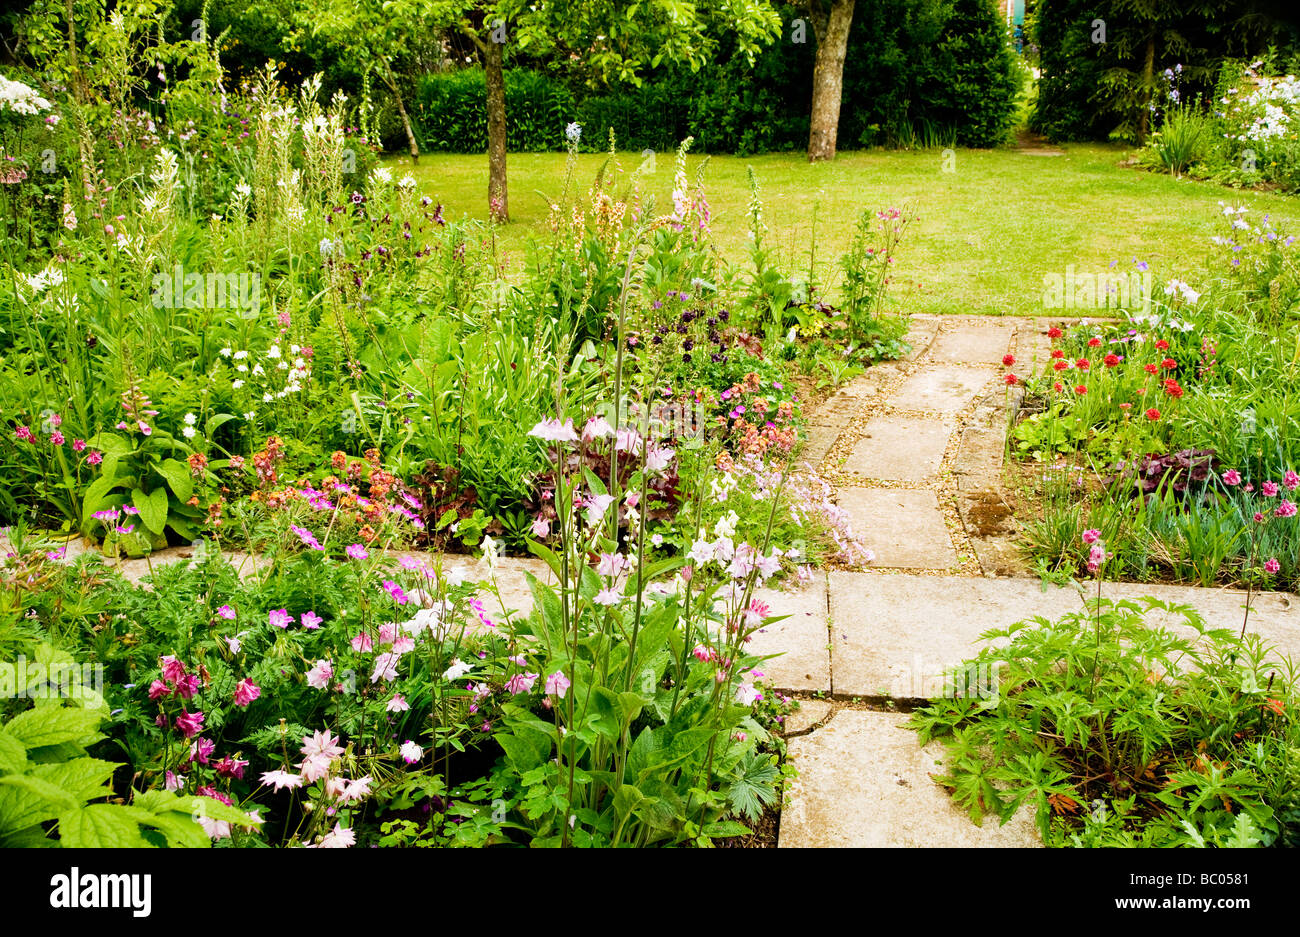 Flower beds around a lawn with Aquilegia and paved footpaths Stock Photo